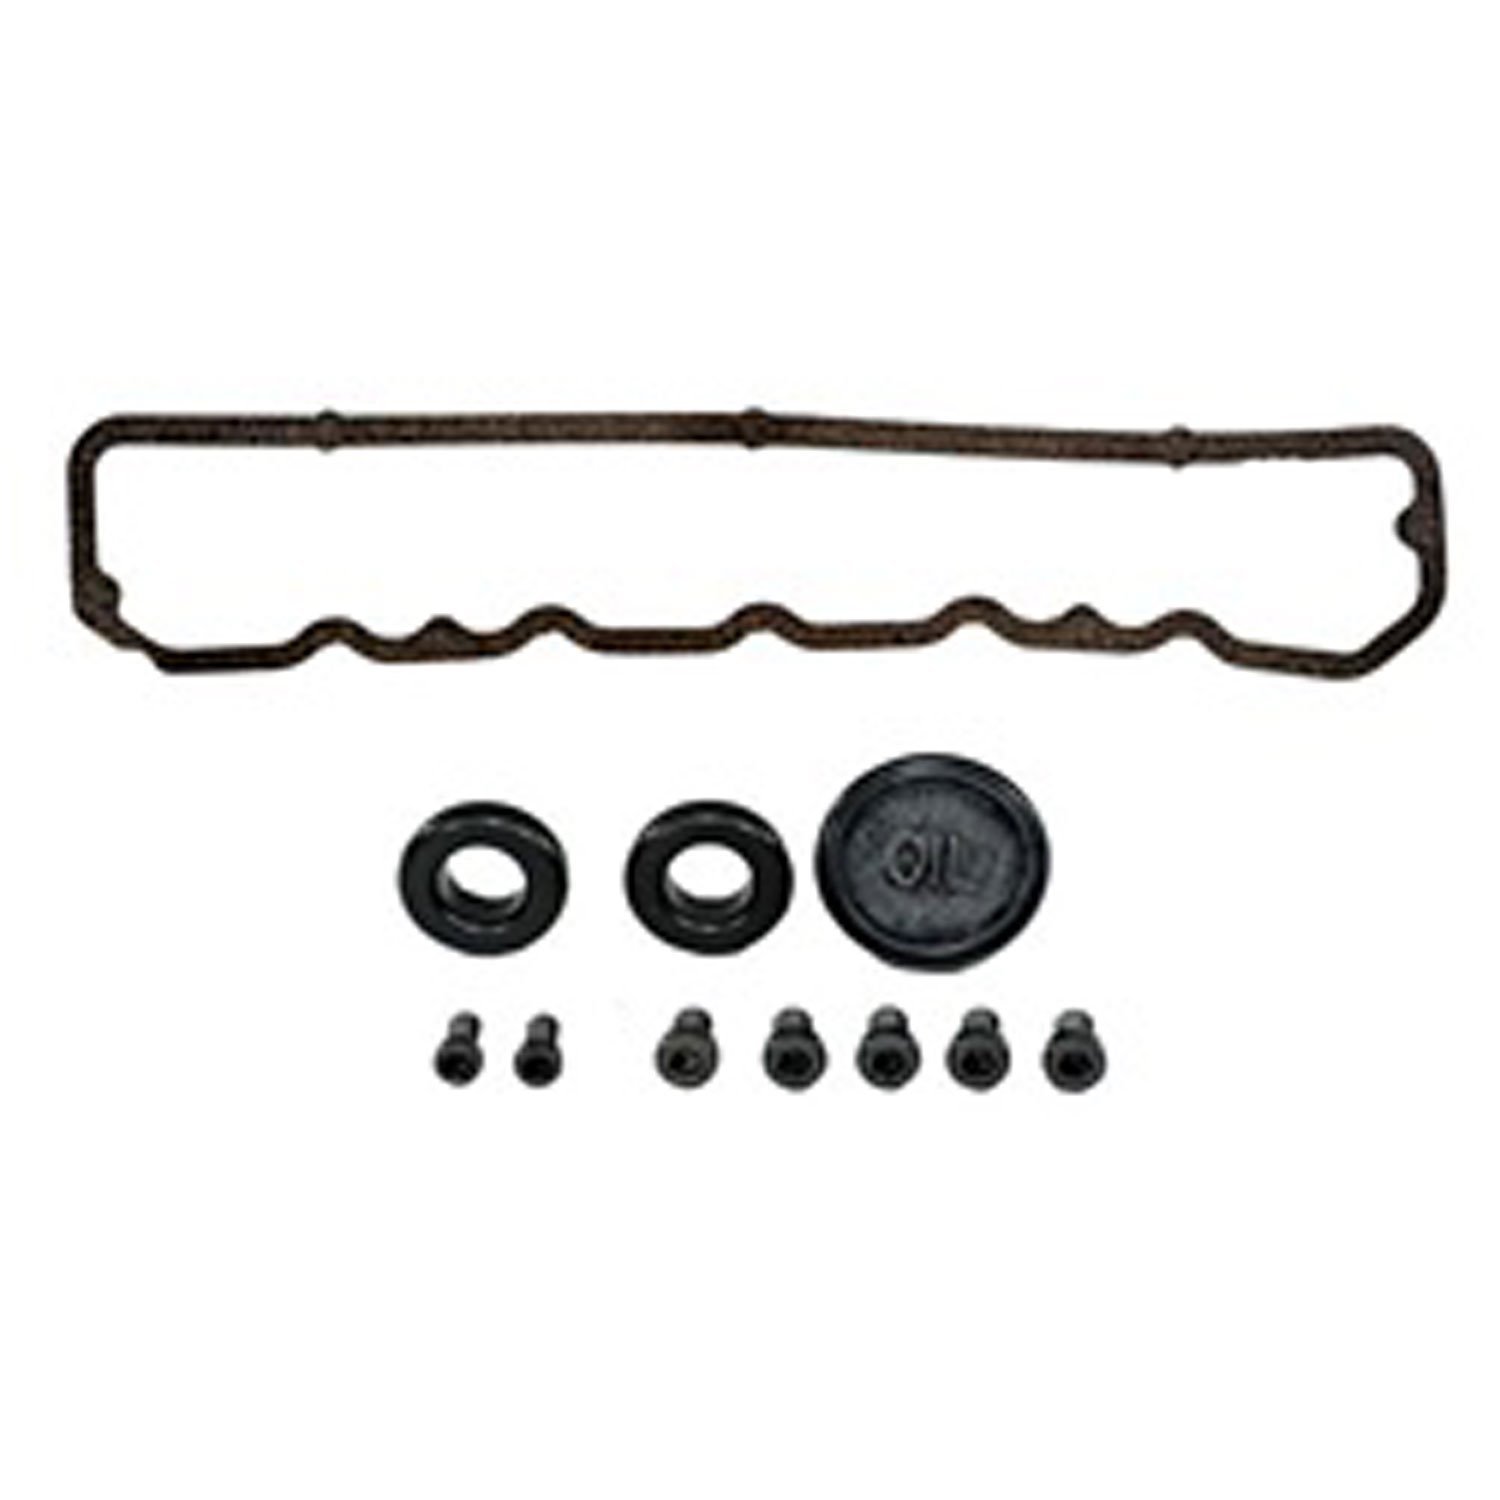 Valve cover gasket kit fits alum. aftermarket covers for the 4.2L engine in 81-86 Jeep CJ 1987 Wranglers 81-87 SJ models